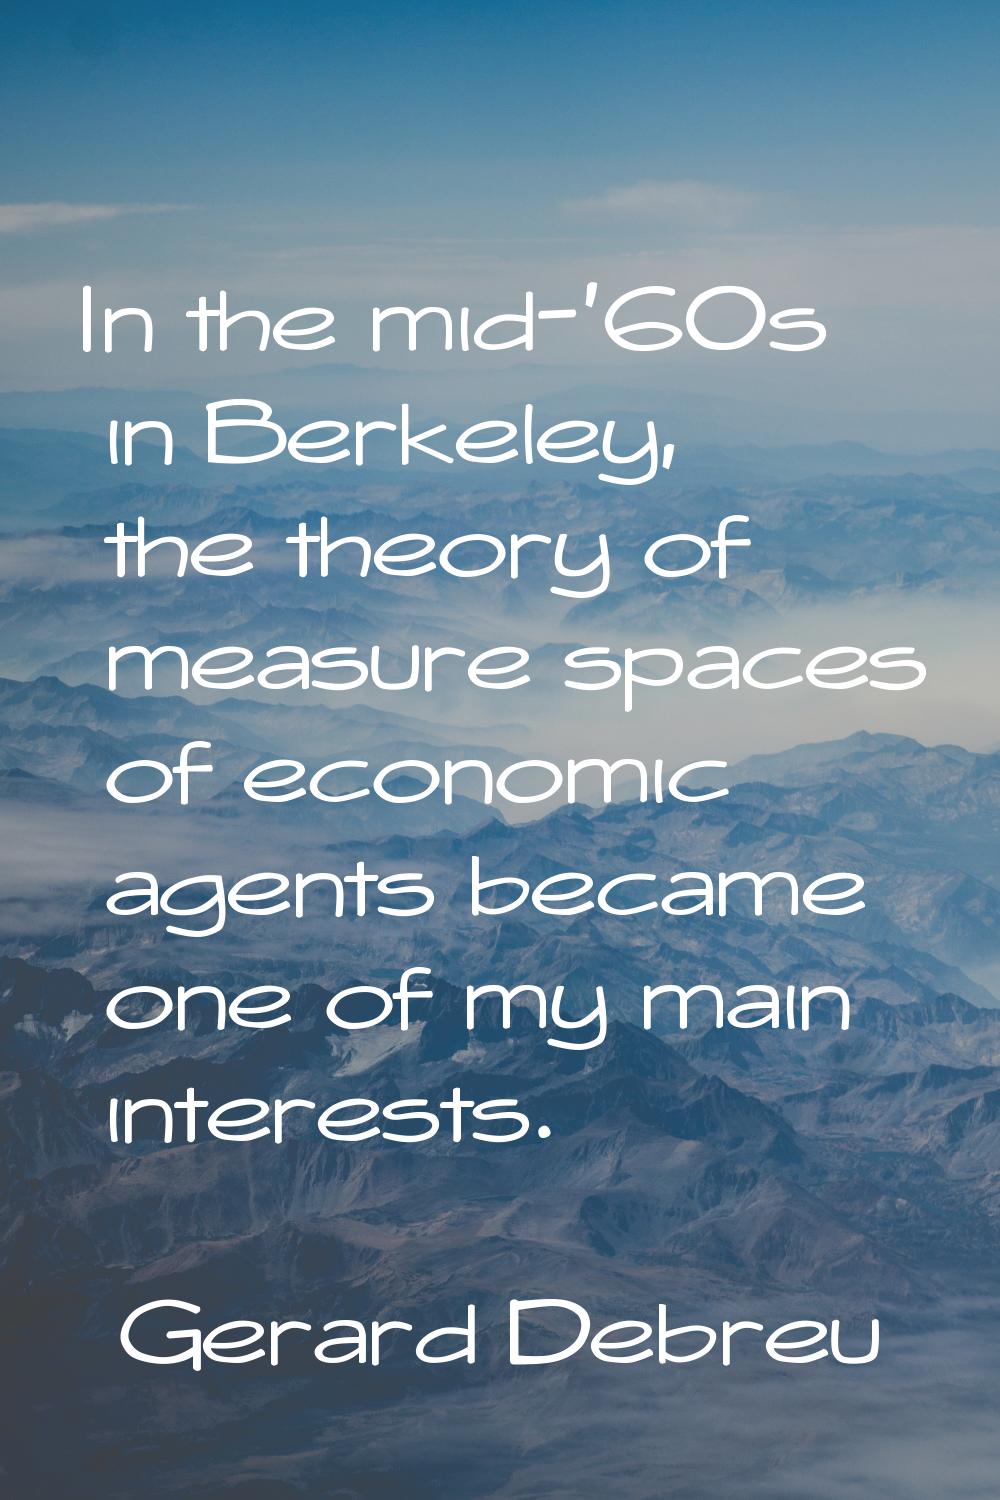 In the mid-'60s in Berkeley, the theory of measure spaces of economic agents became one of my main 